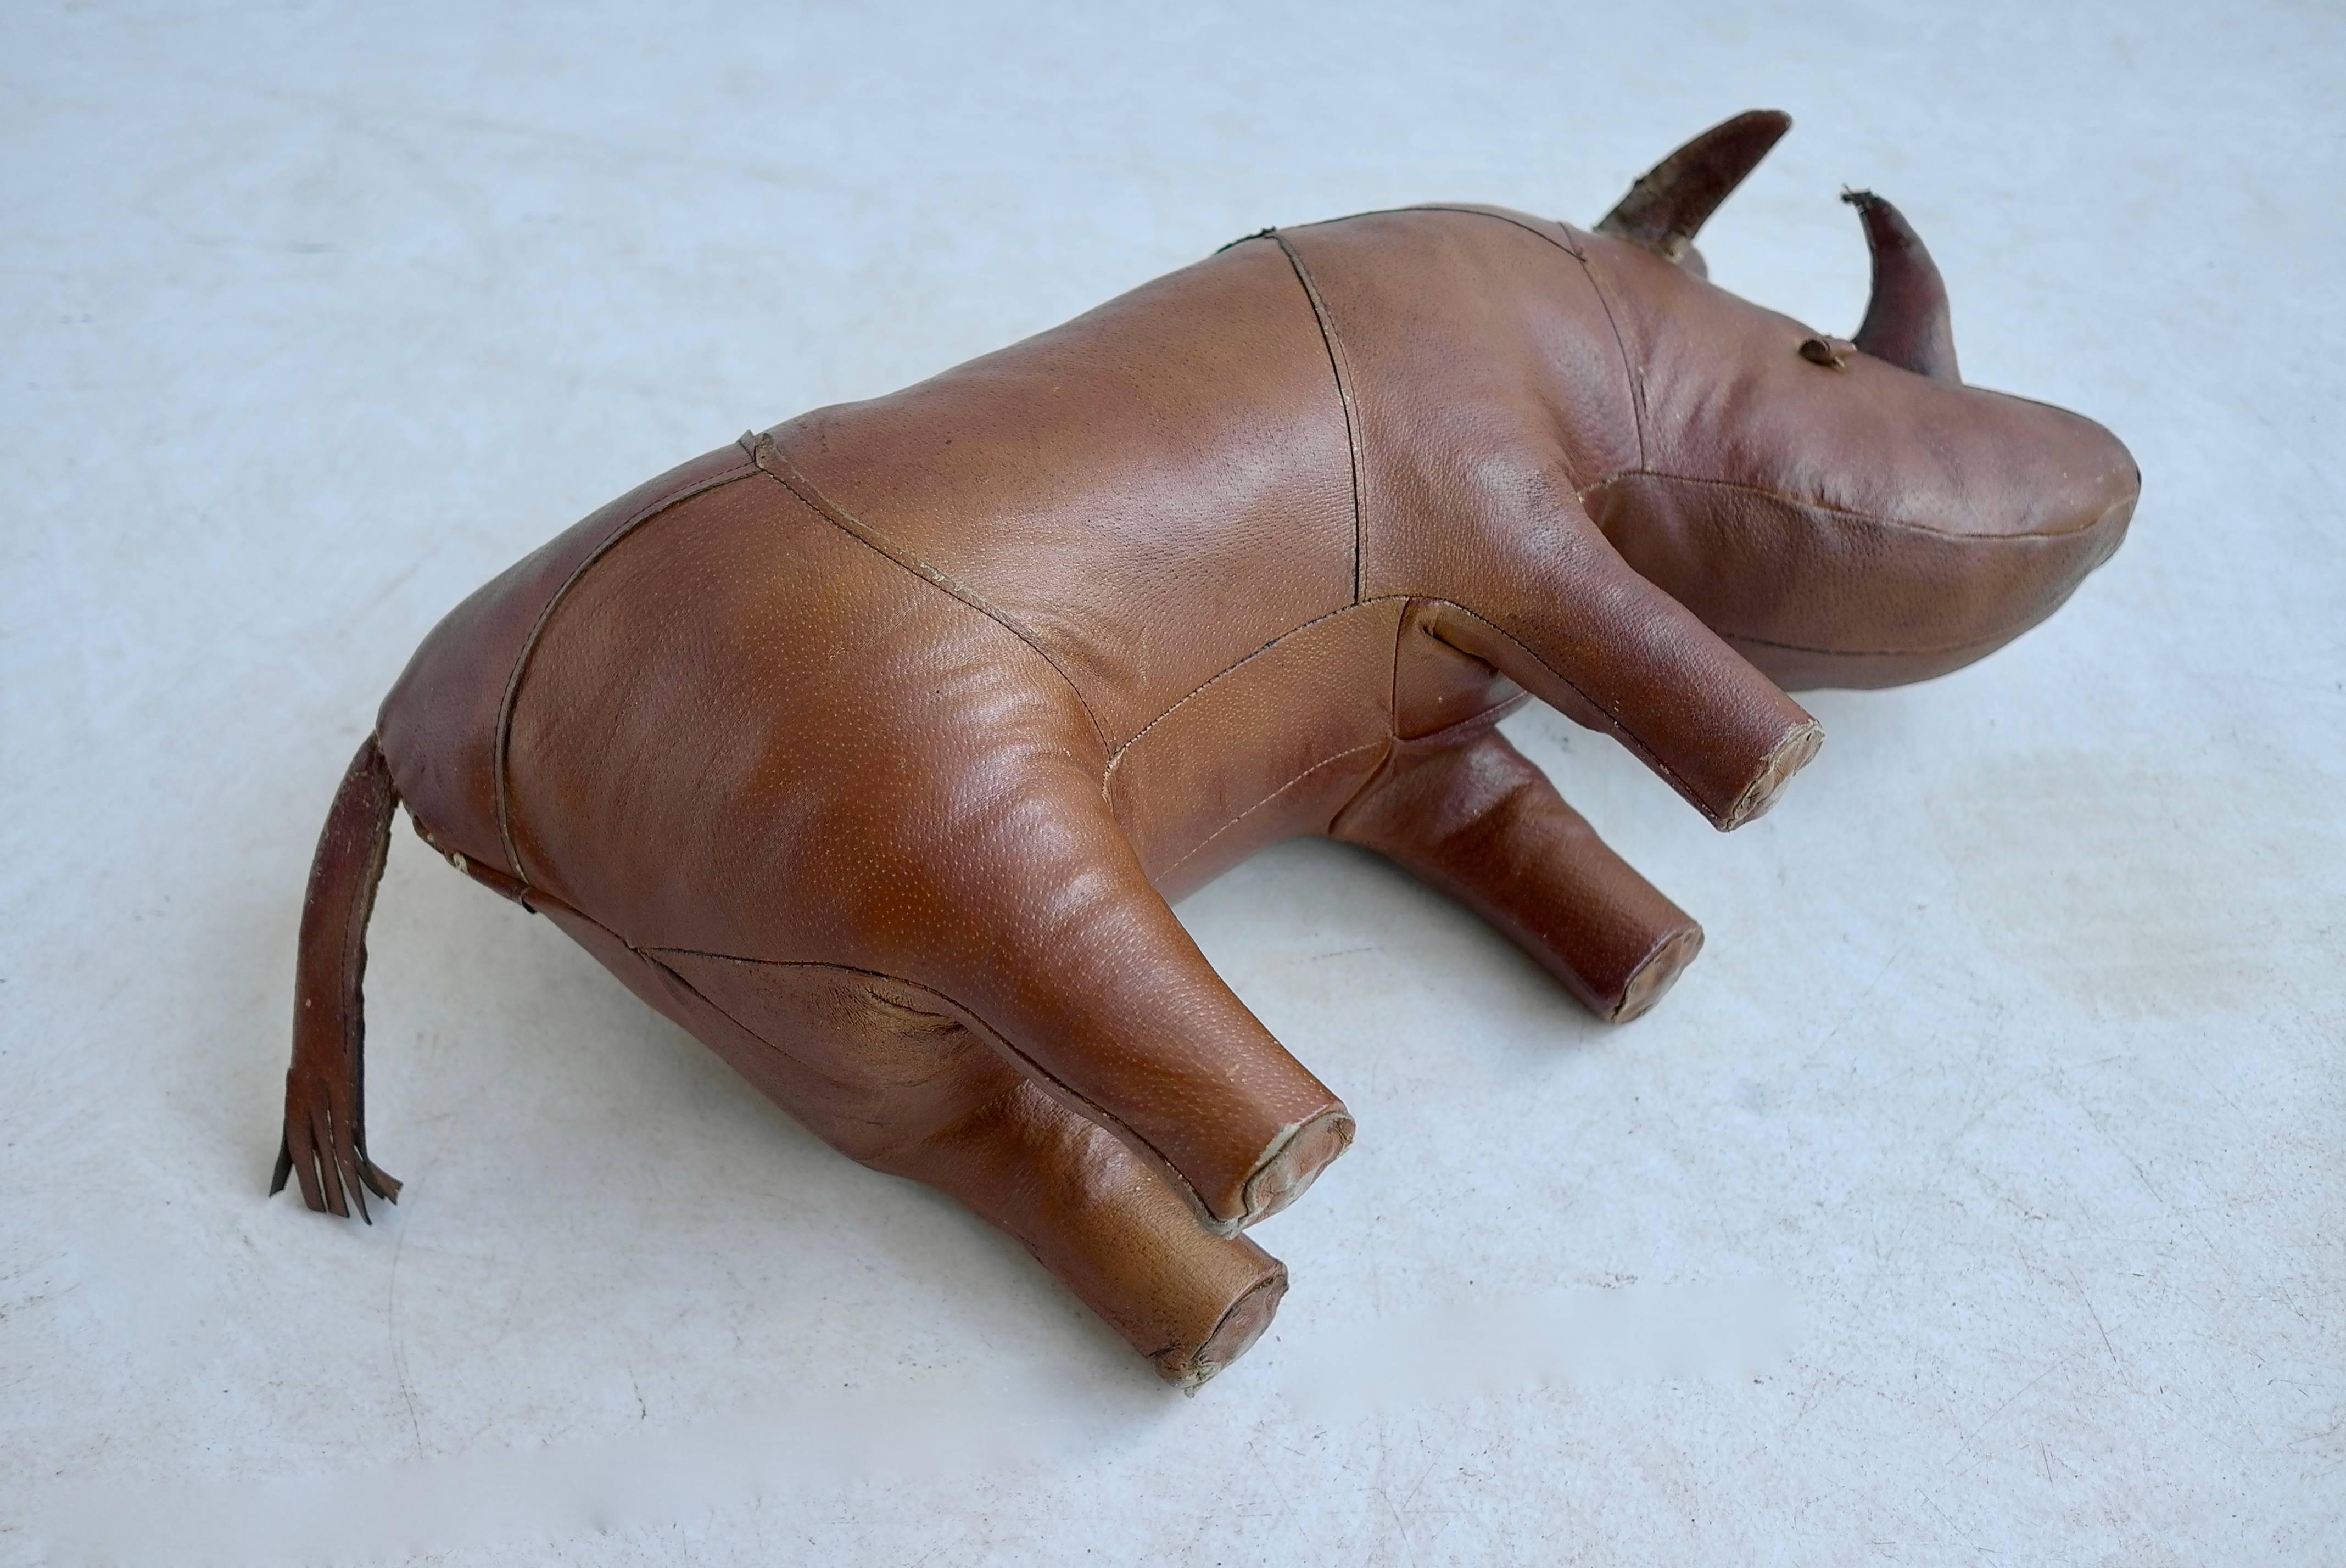 20th Century Leather Rhino by Dimitri Omersa for Abercrombie & Fitch